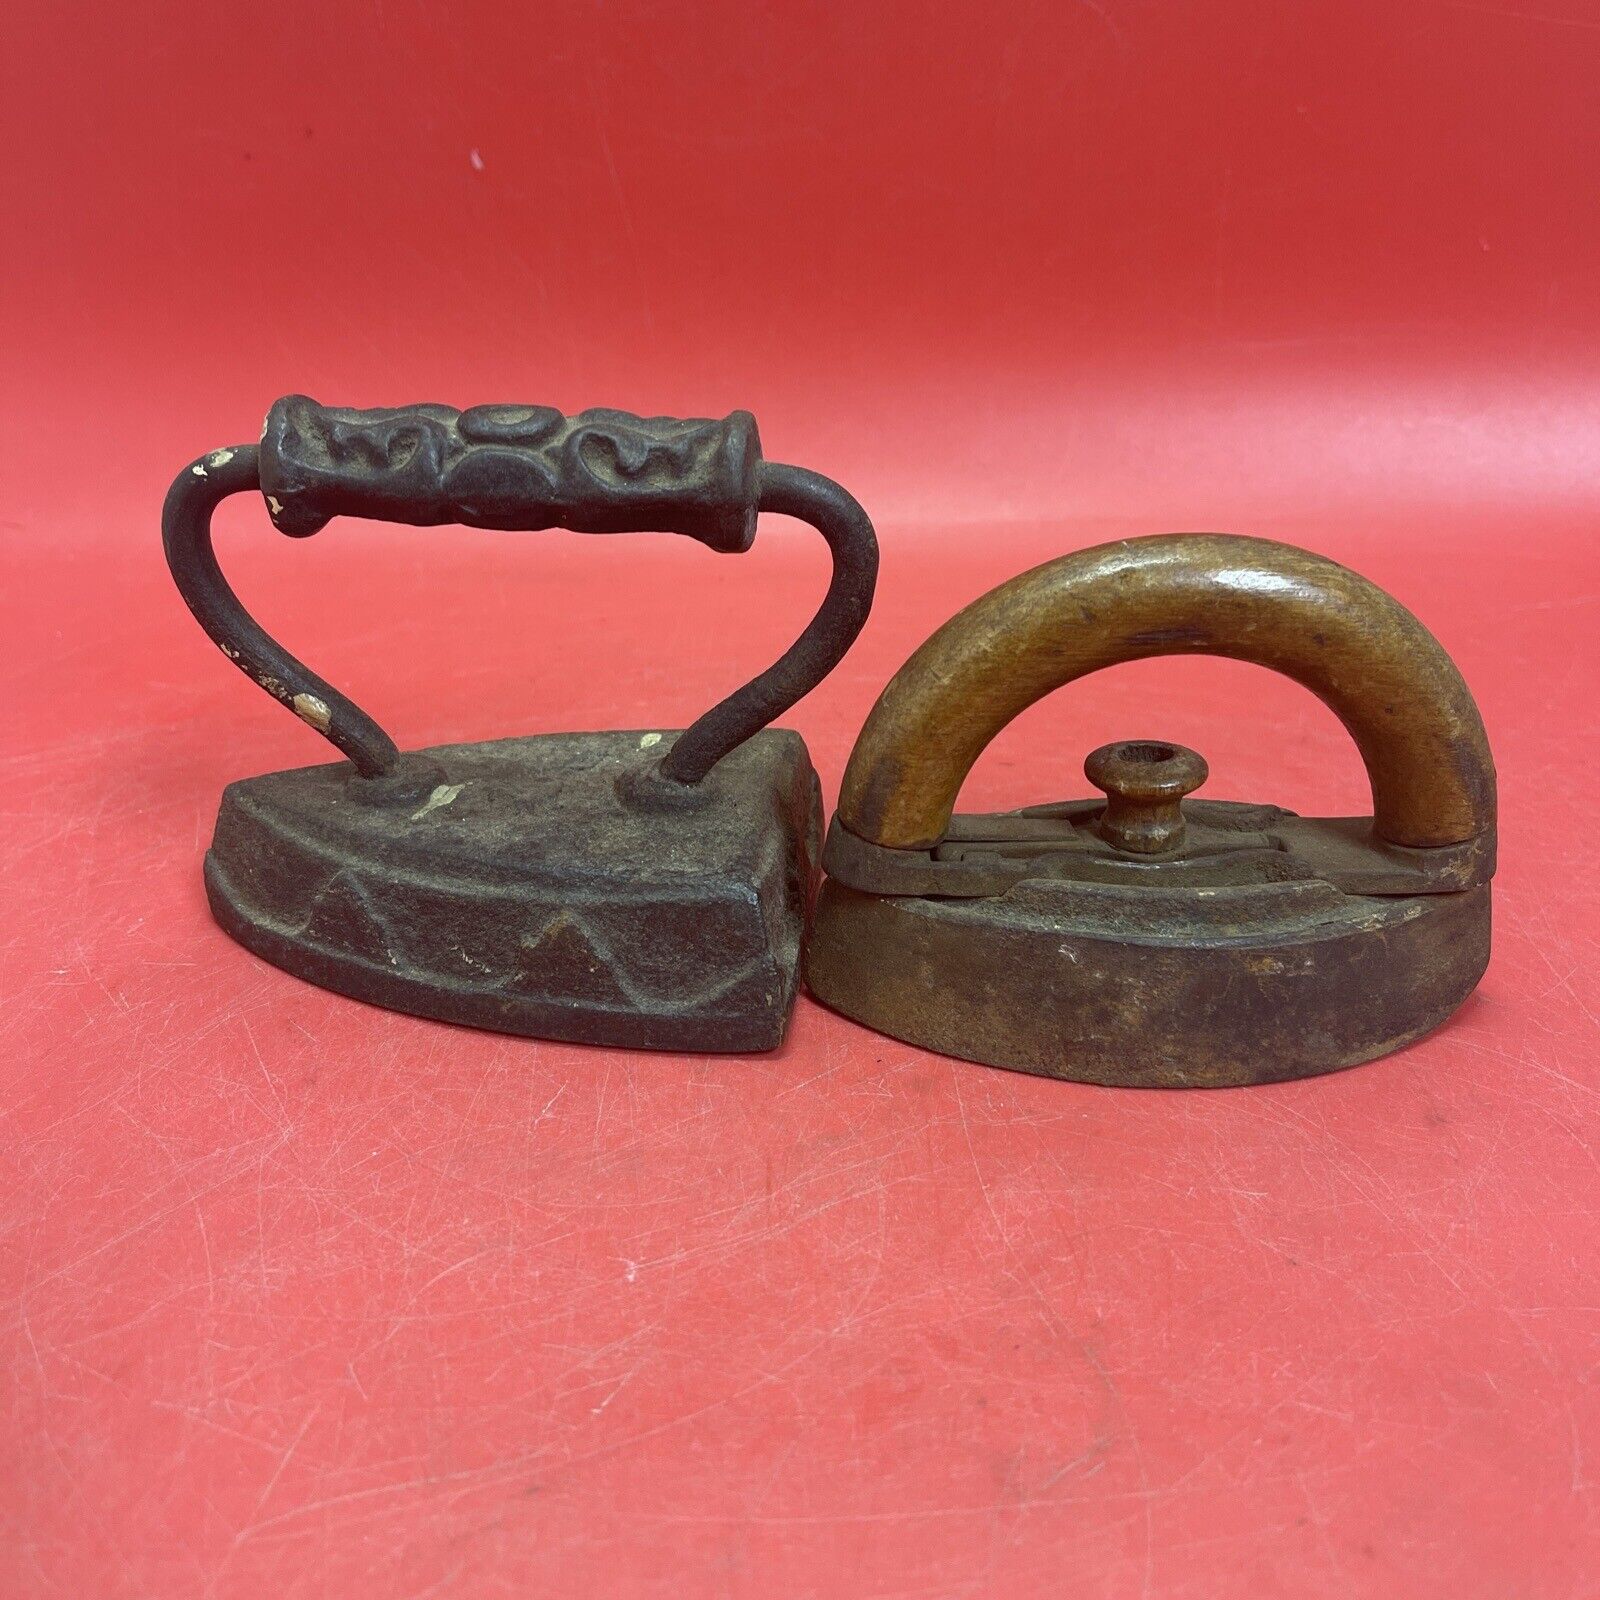 Vintage irons, cast iron, with wooden handle, lot of 2 pcs.